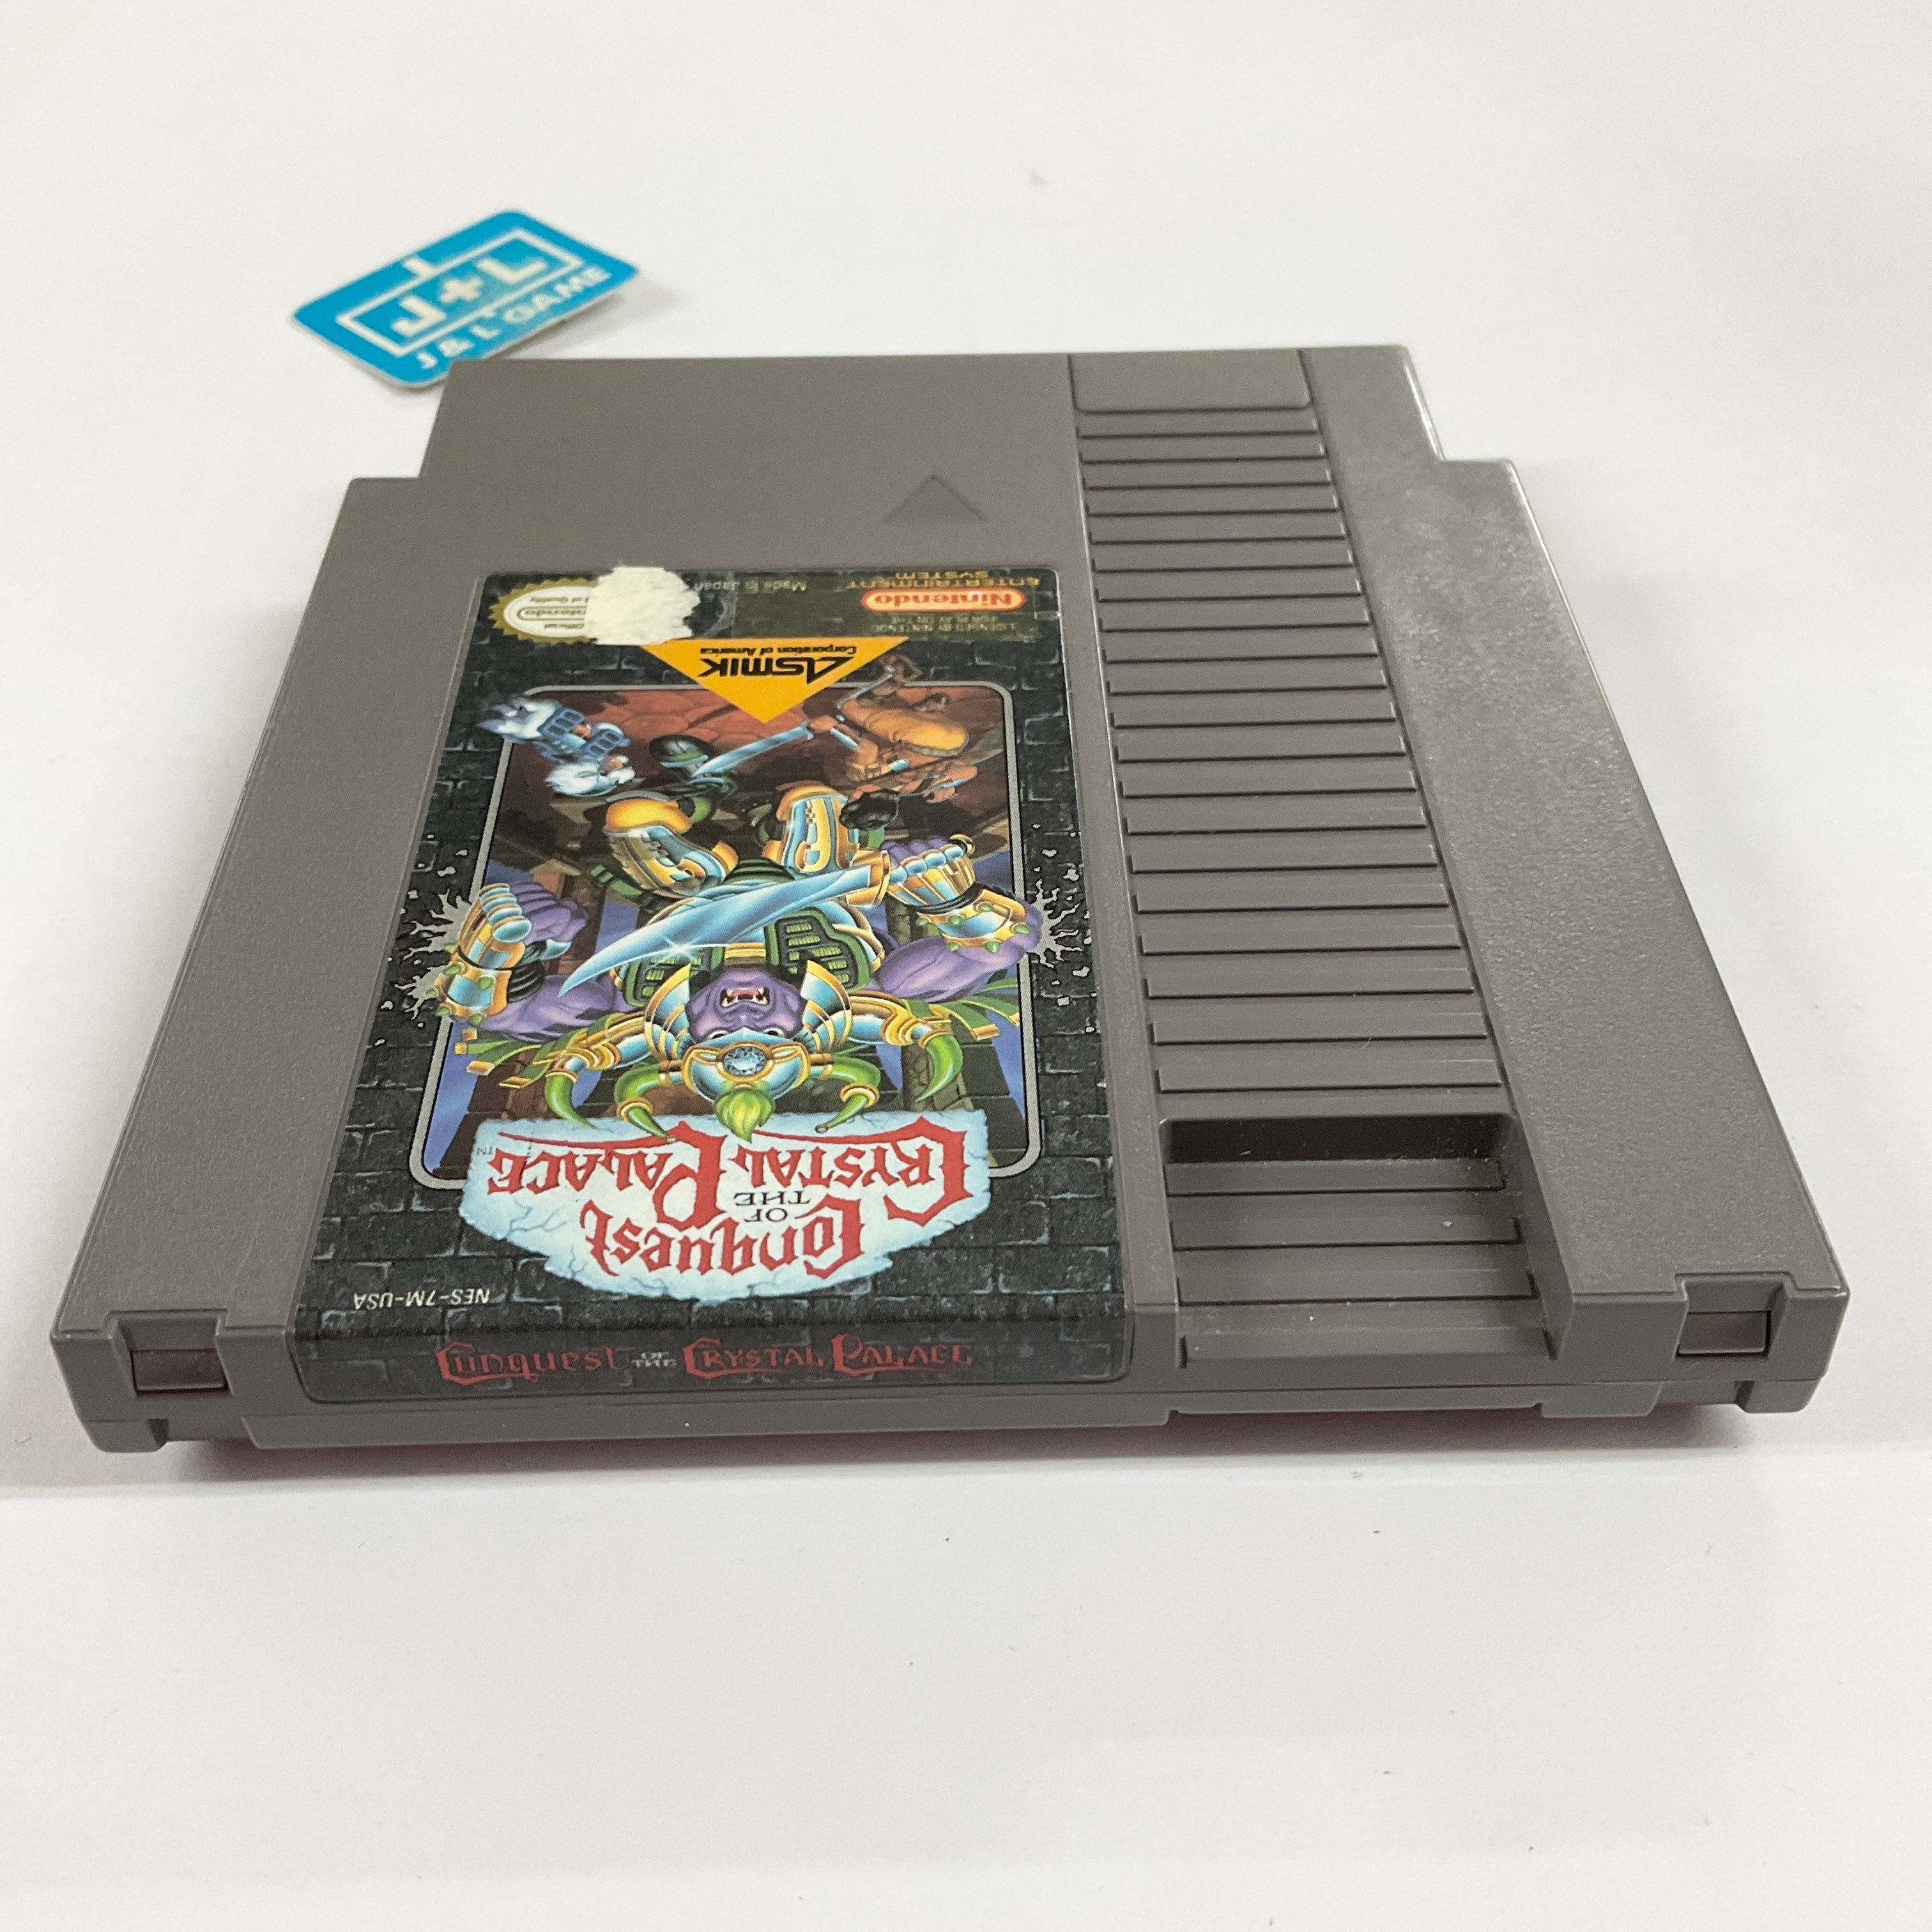 Conquest of the Crystal Palace - (NES) Nintendo Entertainment System [Pre-Owned] Video Games Asmik Corporation of America   